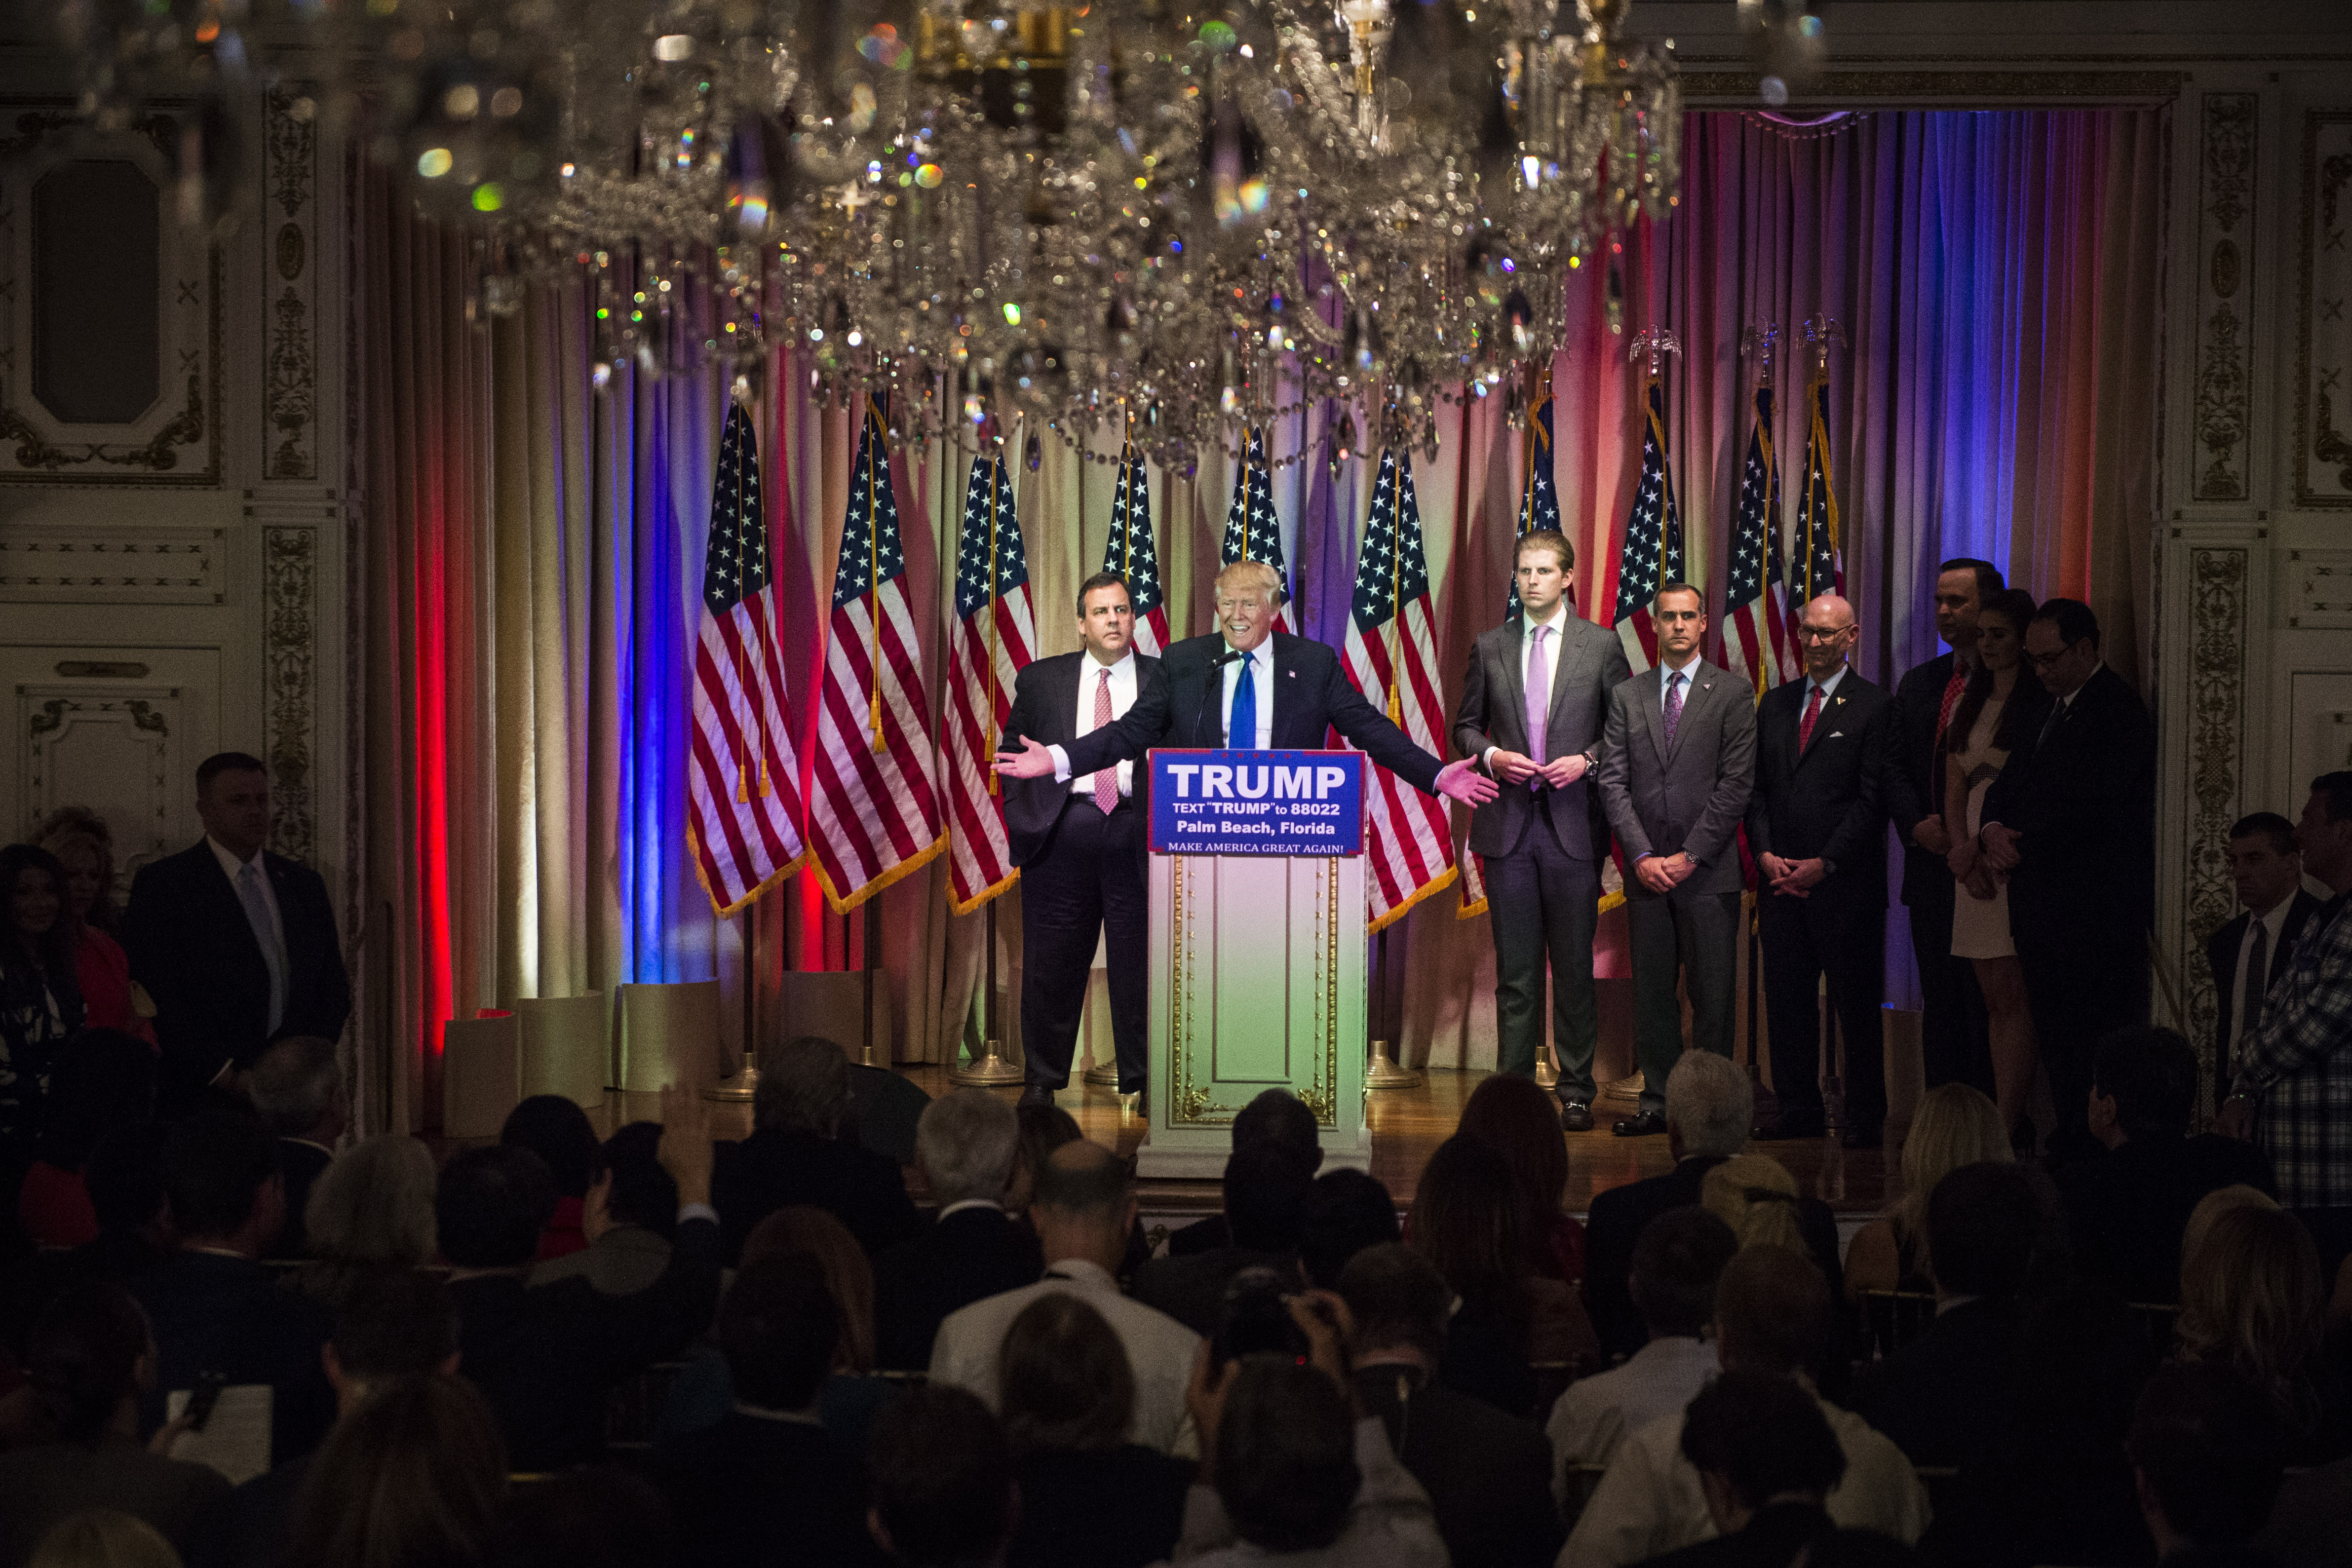 Republican presidential candidate Donald Trump speaks, alongside New Jersey Gov. Chris Christie, left, during a campaign press event at the Mar-A-Lago Club in Palm Beach, FL on Mar. 1, 2016.